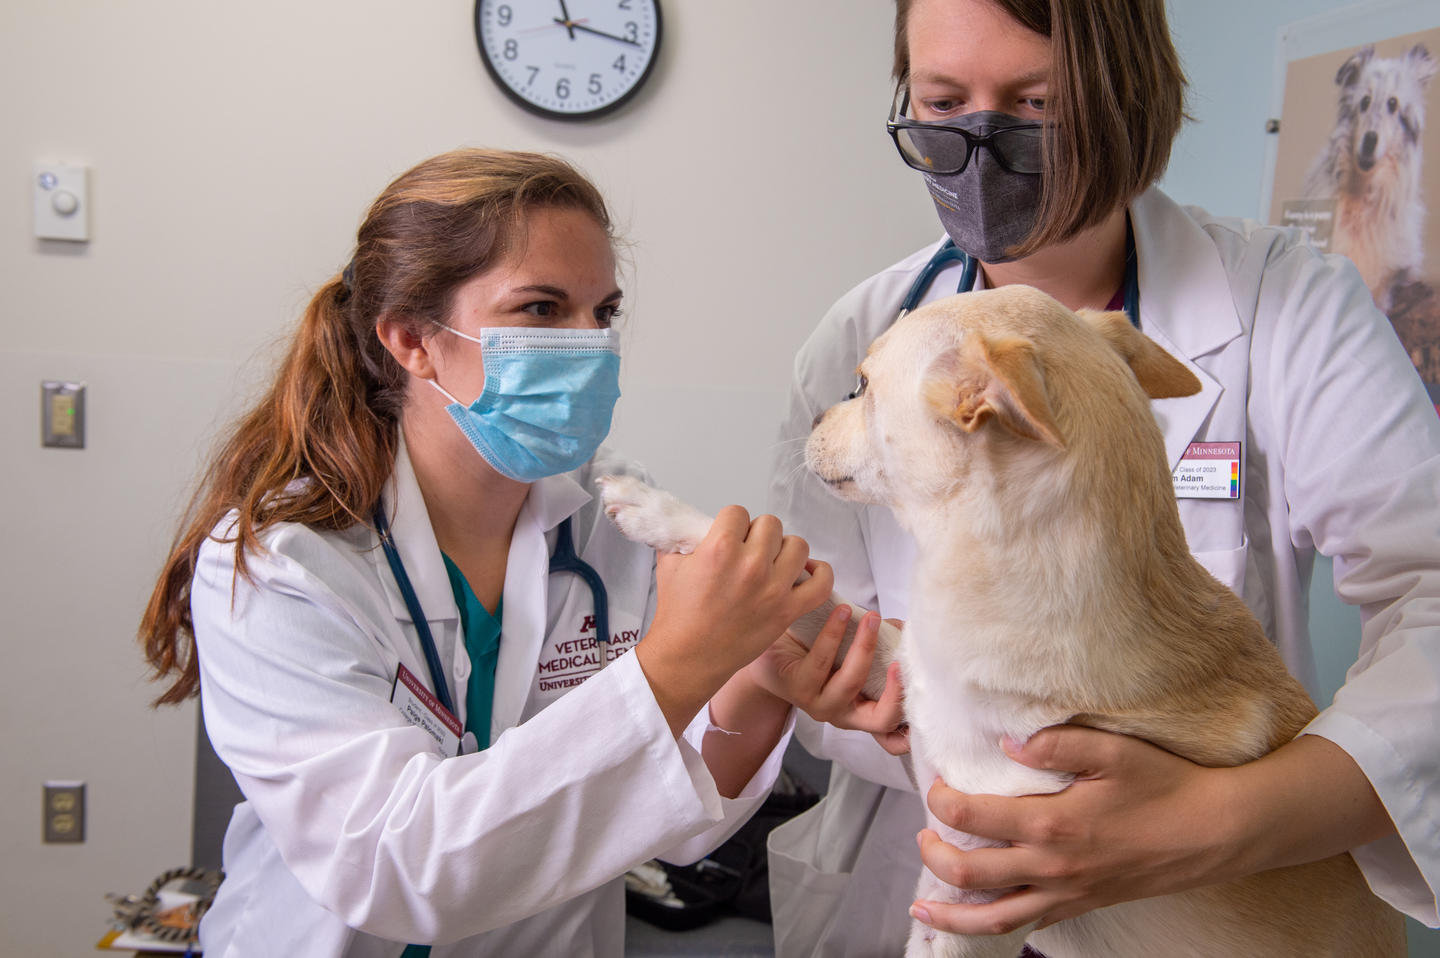 Veterinary student and instructor examining a dog